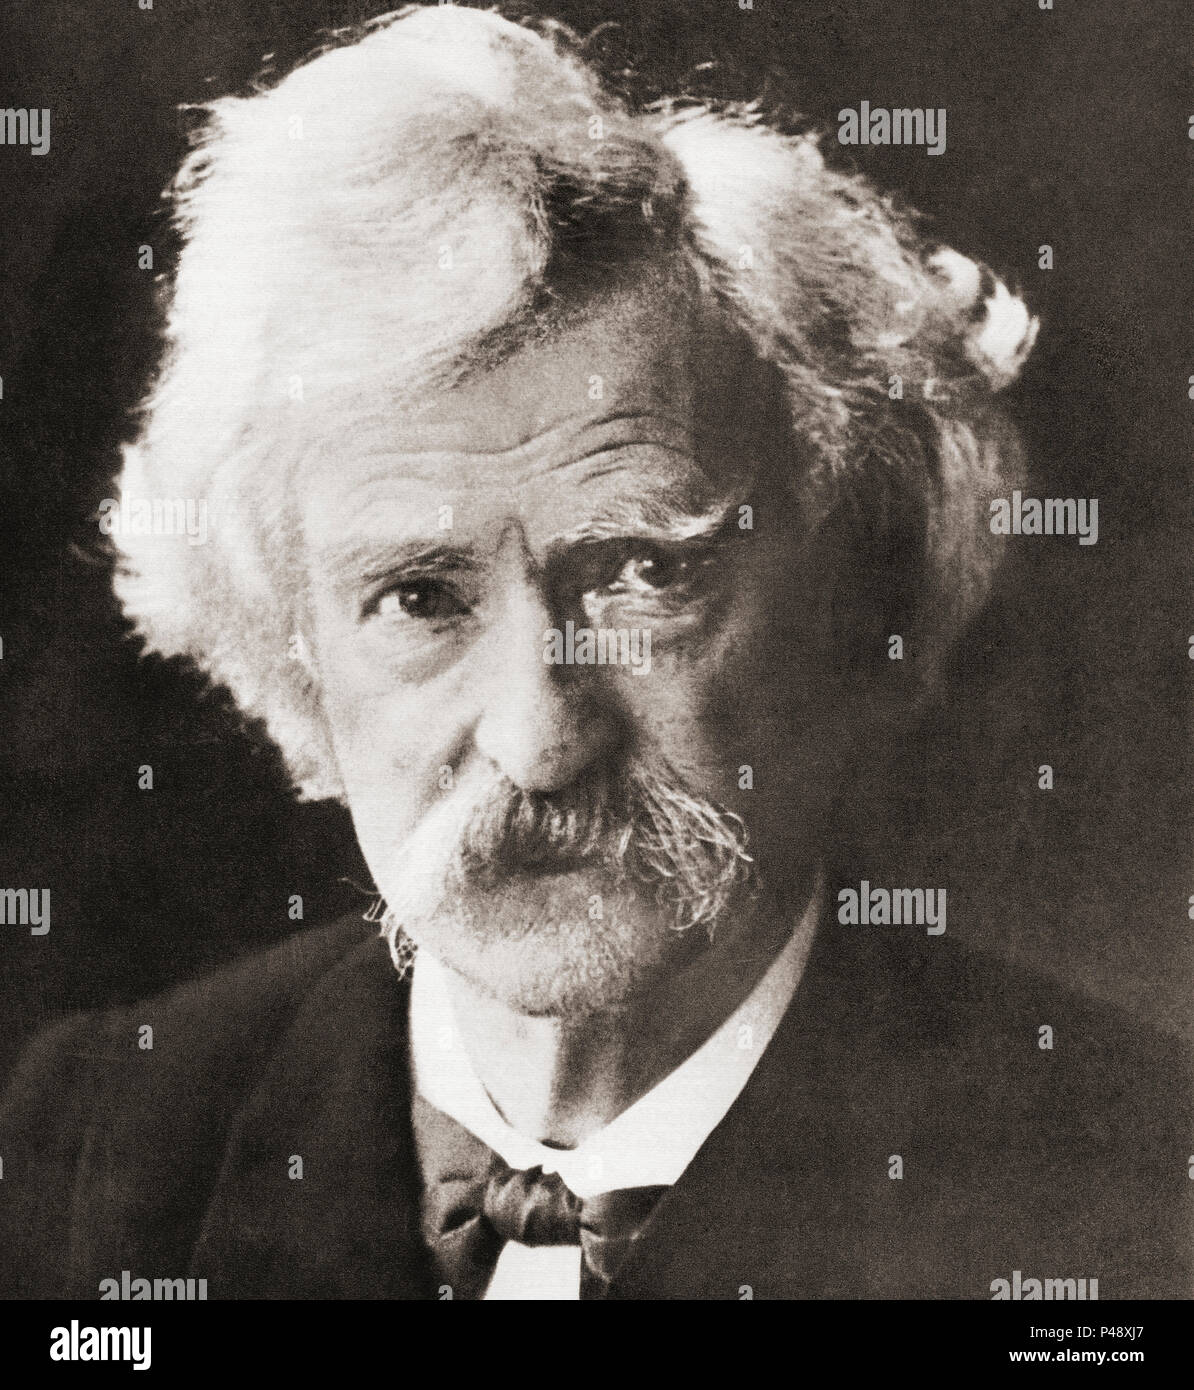 Samuel Langhorne Clemens, 1835 -1910, better known by his pen name Mark Twain. American writer, humorist, entrepreneur, publisher, and lecturer.  After a contemporary print. Stock Photo